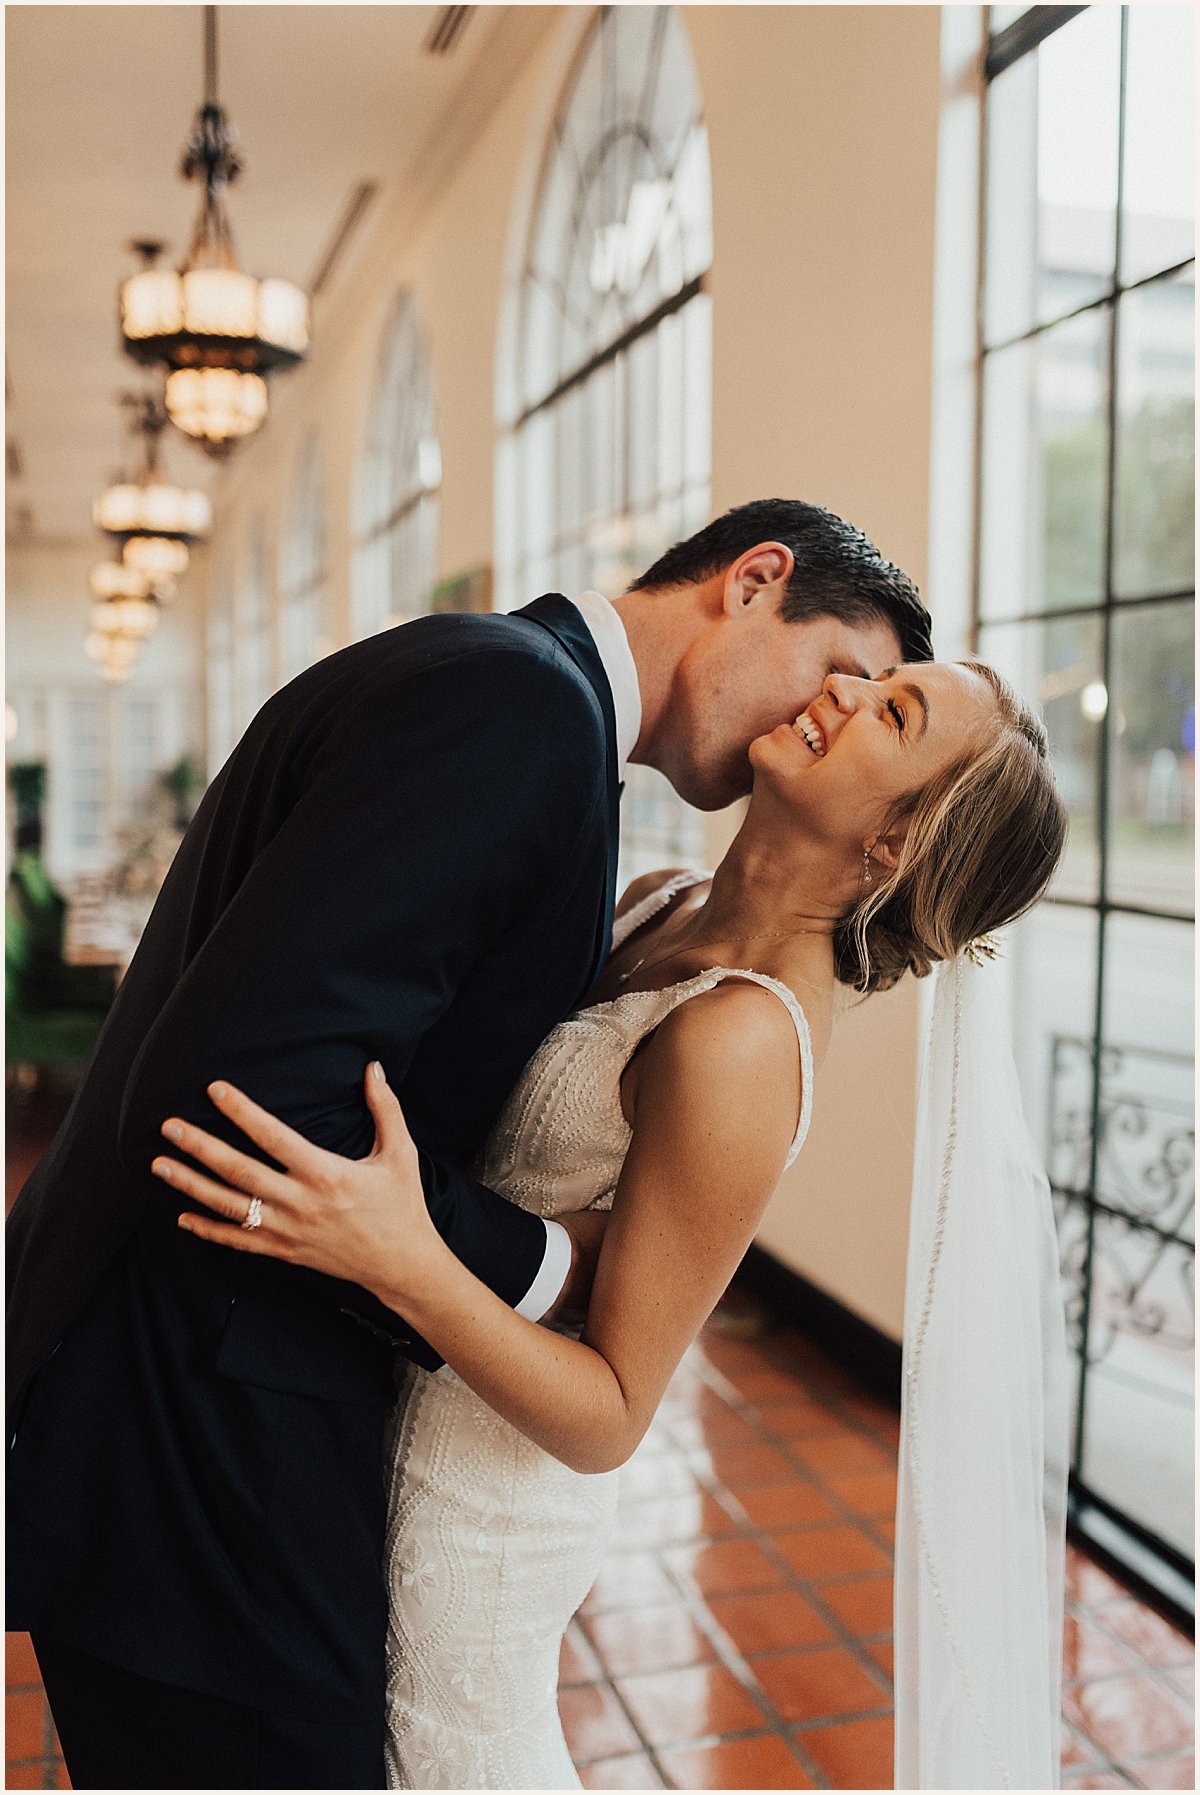 Bride laughing while groom kisses neck on wedding day | Lauren Parr Photo